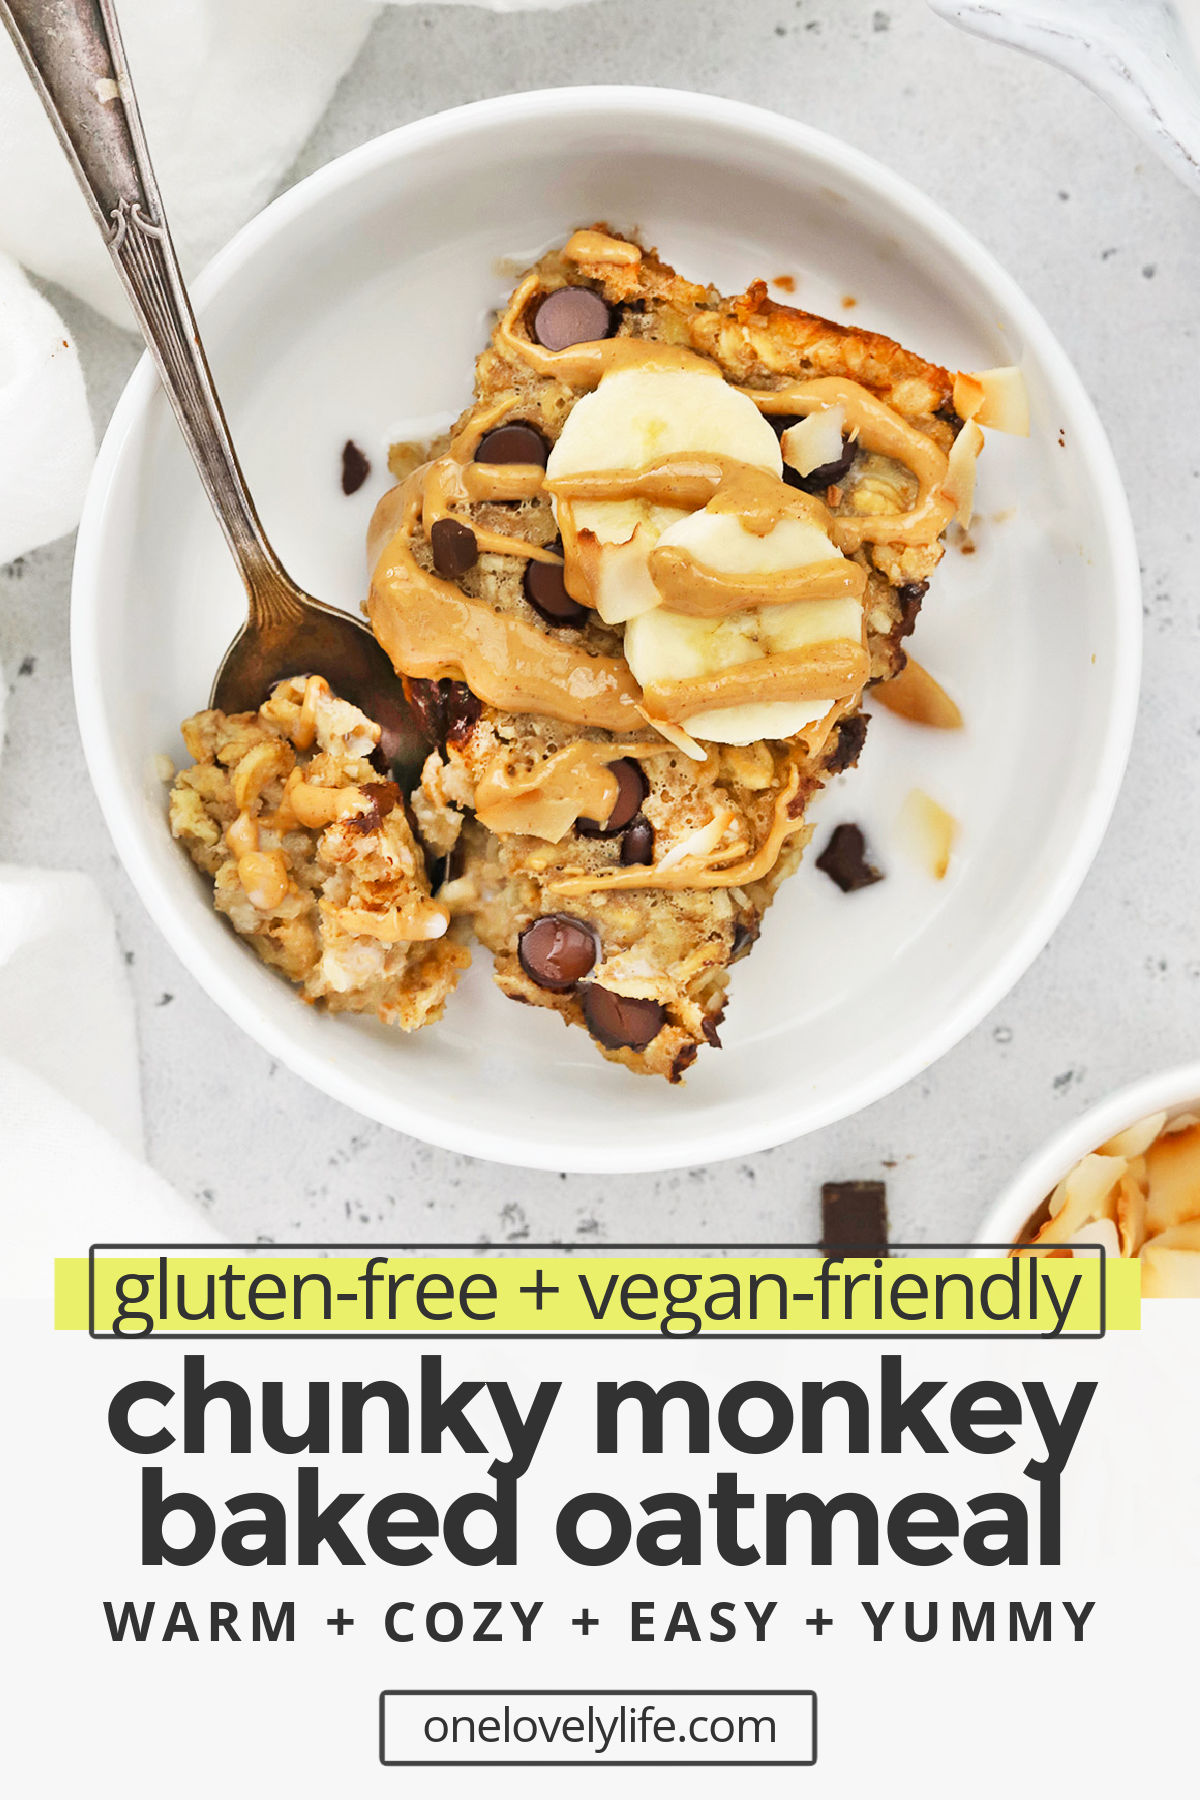 Chunky Monkey Baked Oatmeal - This peanut butter banana baked oatmeal is loaded with goodies like coconut and chocolate chips to make any morning feel special. (Gluten-Free, Vegan-Friendly) // Peanut Butter Banana Baked Oatmeal Recipe // Healthy Baked Oatmeal // Healthy Breakfast #bakedoatmeal #glutenfree #chunkymonkey #oatmeal #healthybreakfast